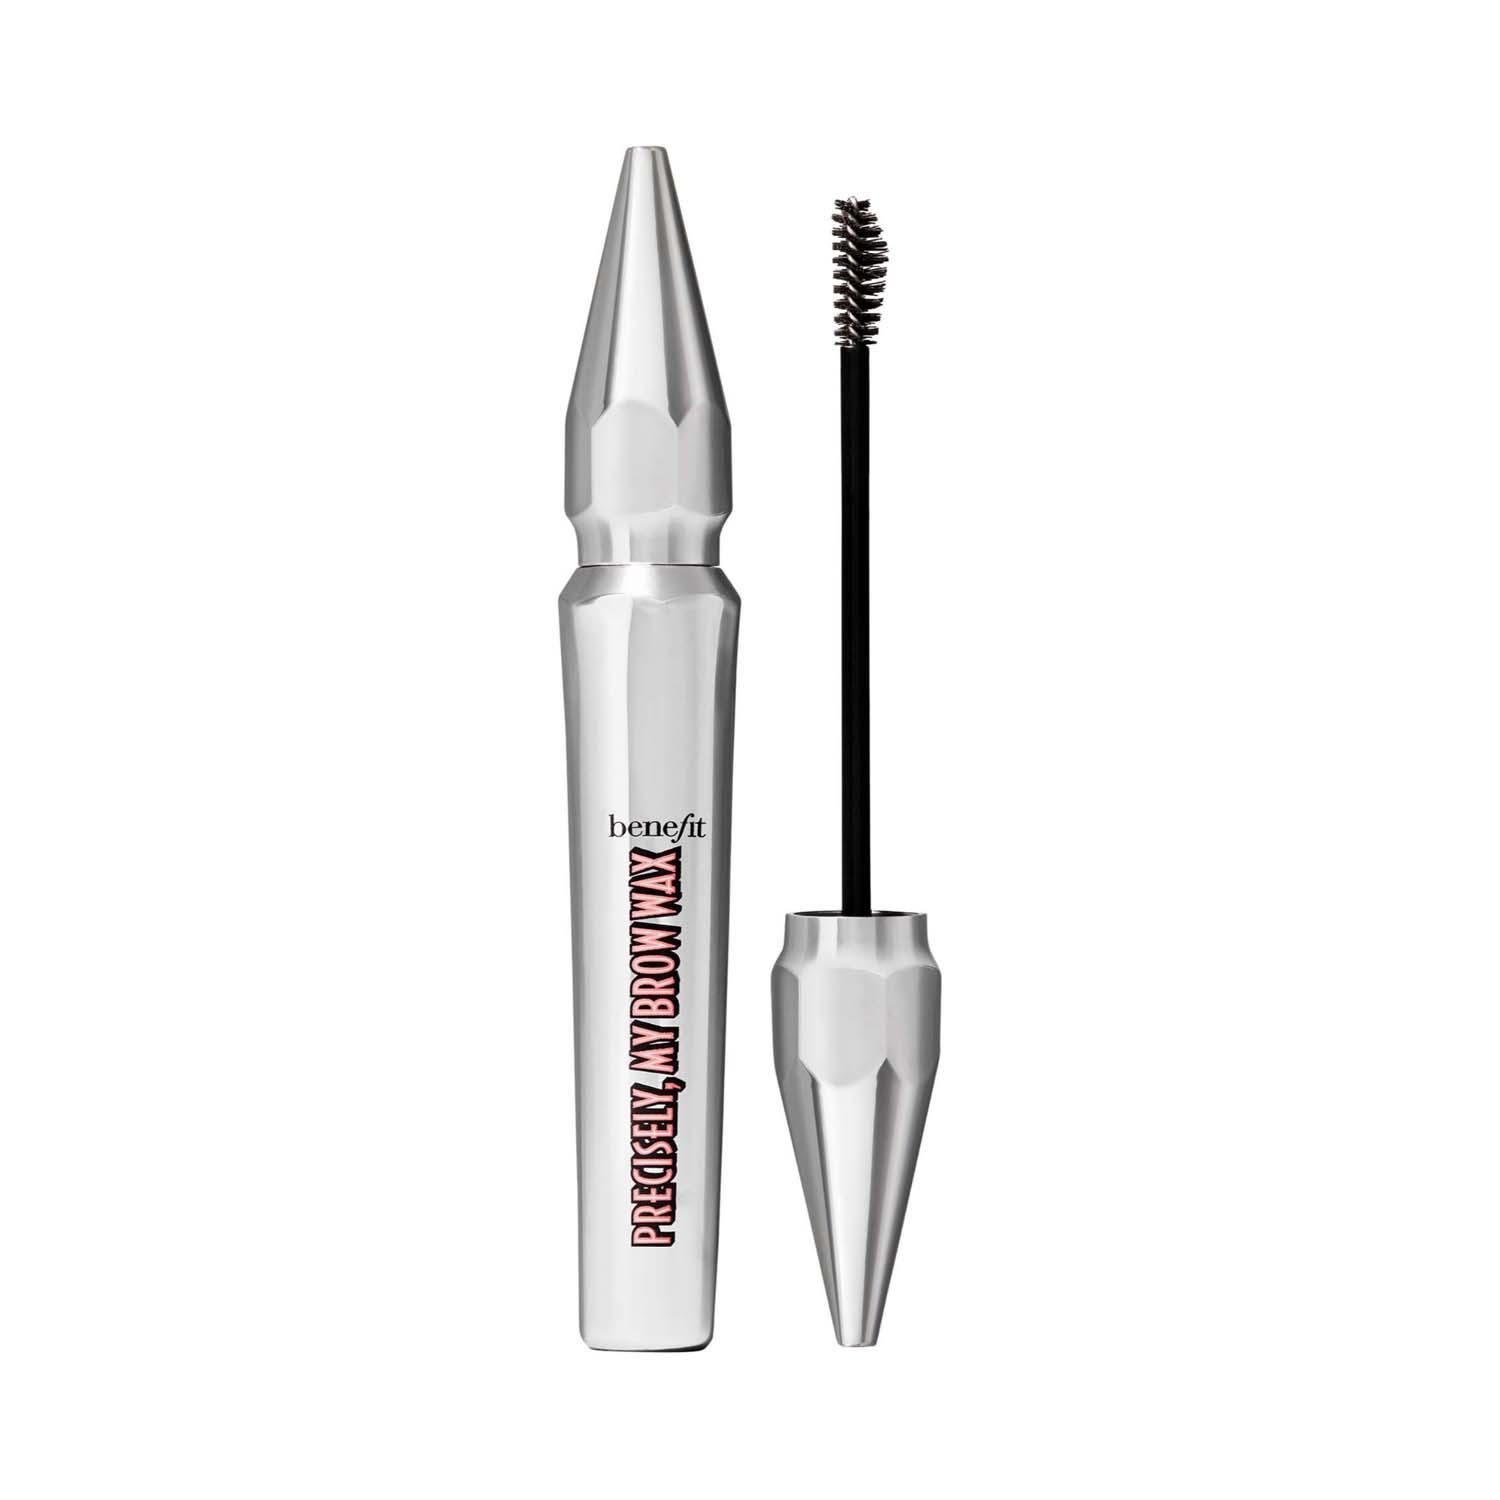 Benefit Cosmetics | Benefit Cosmetics Precisely, My Brow Wax - 1 Cool Light Blonde (5 g)